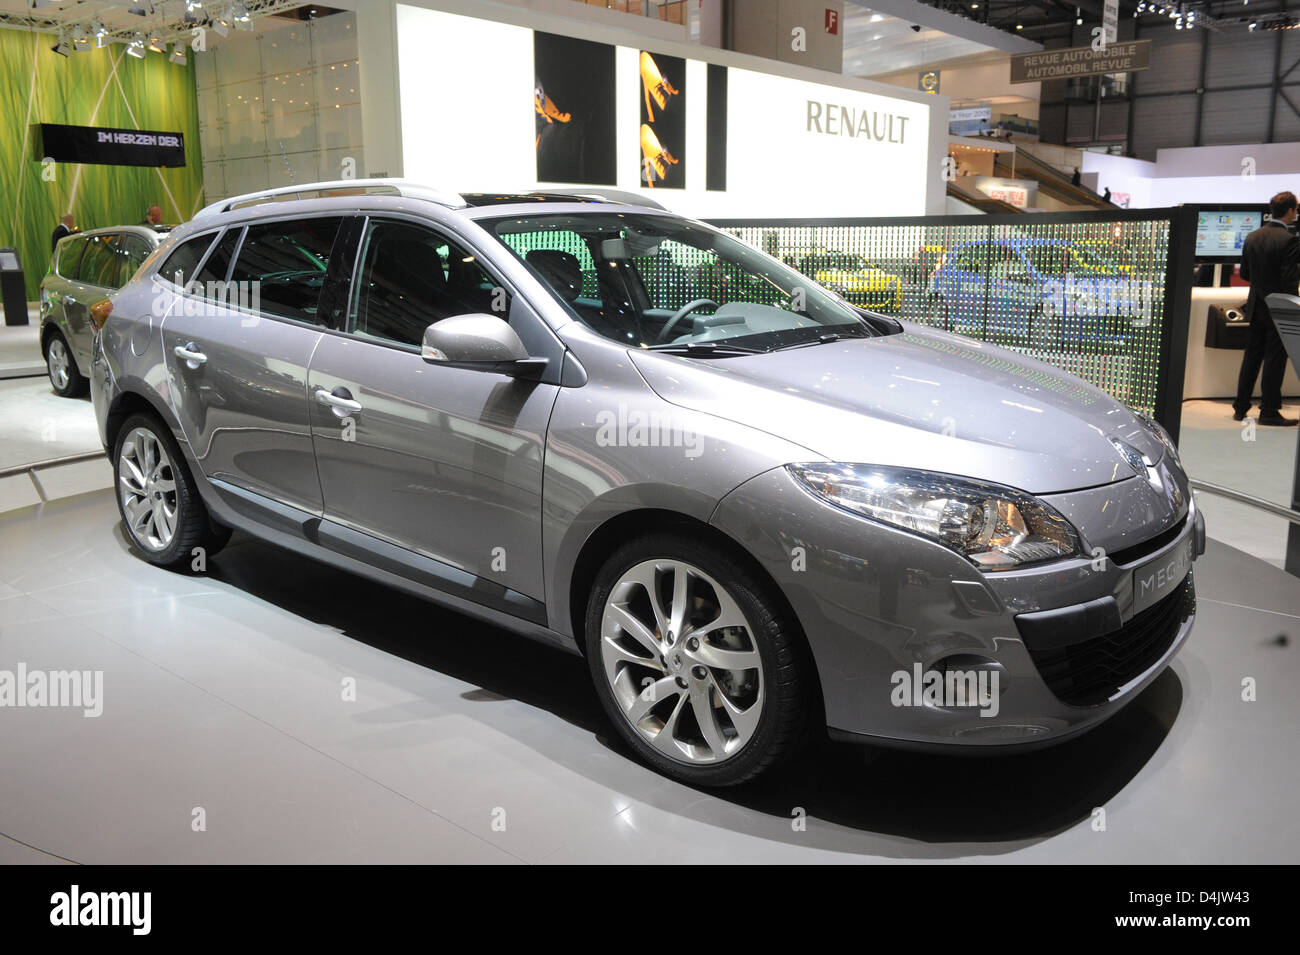 A Renault Megane Grandtour is pictured on the second press day of the 79th  International Motor Show and Accessories in Geneva, Switzerland, 04 March  2009. Exhibitors present their latest innovations as of